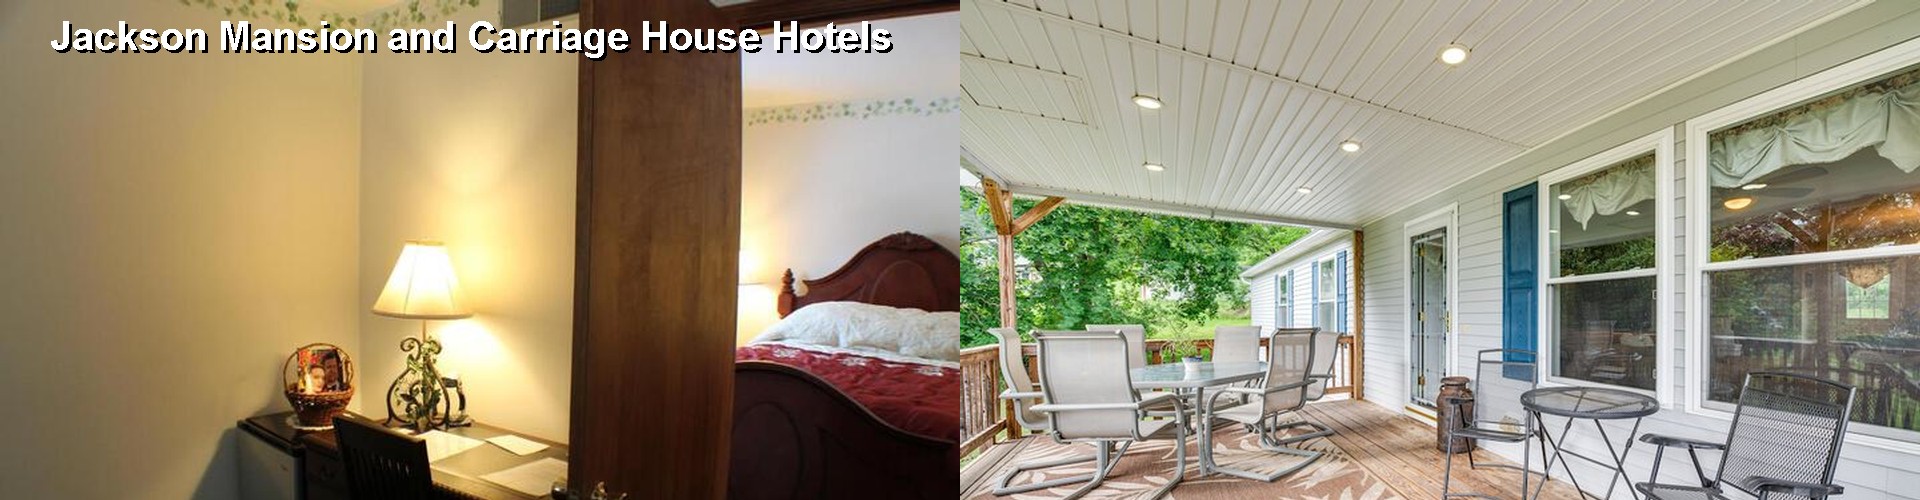 5 Best Hotels near Jackson Mansion and Carriage House